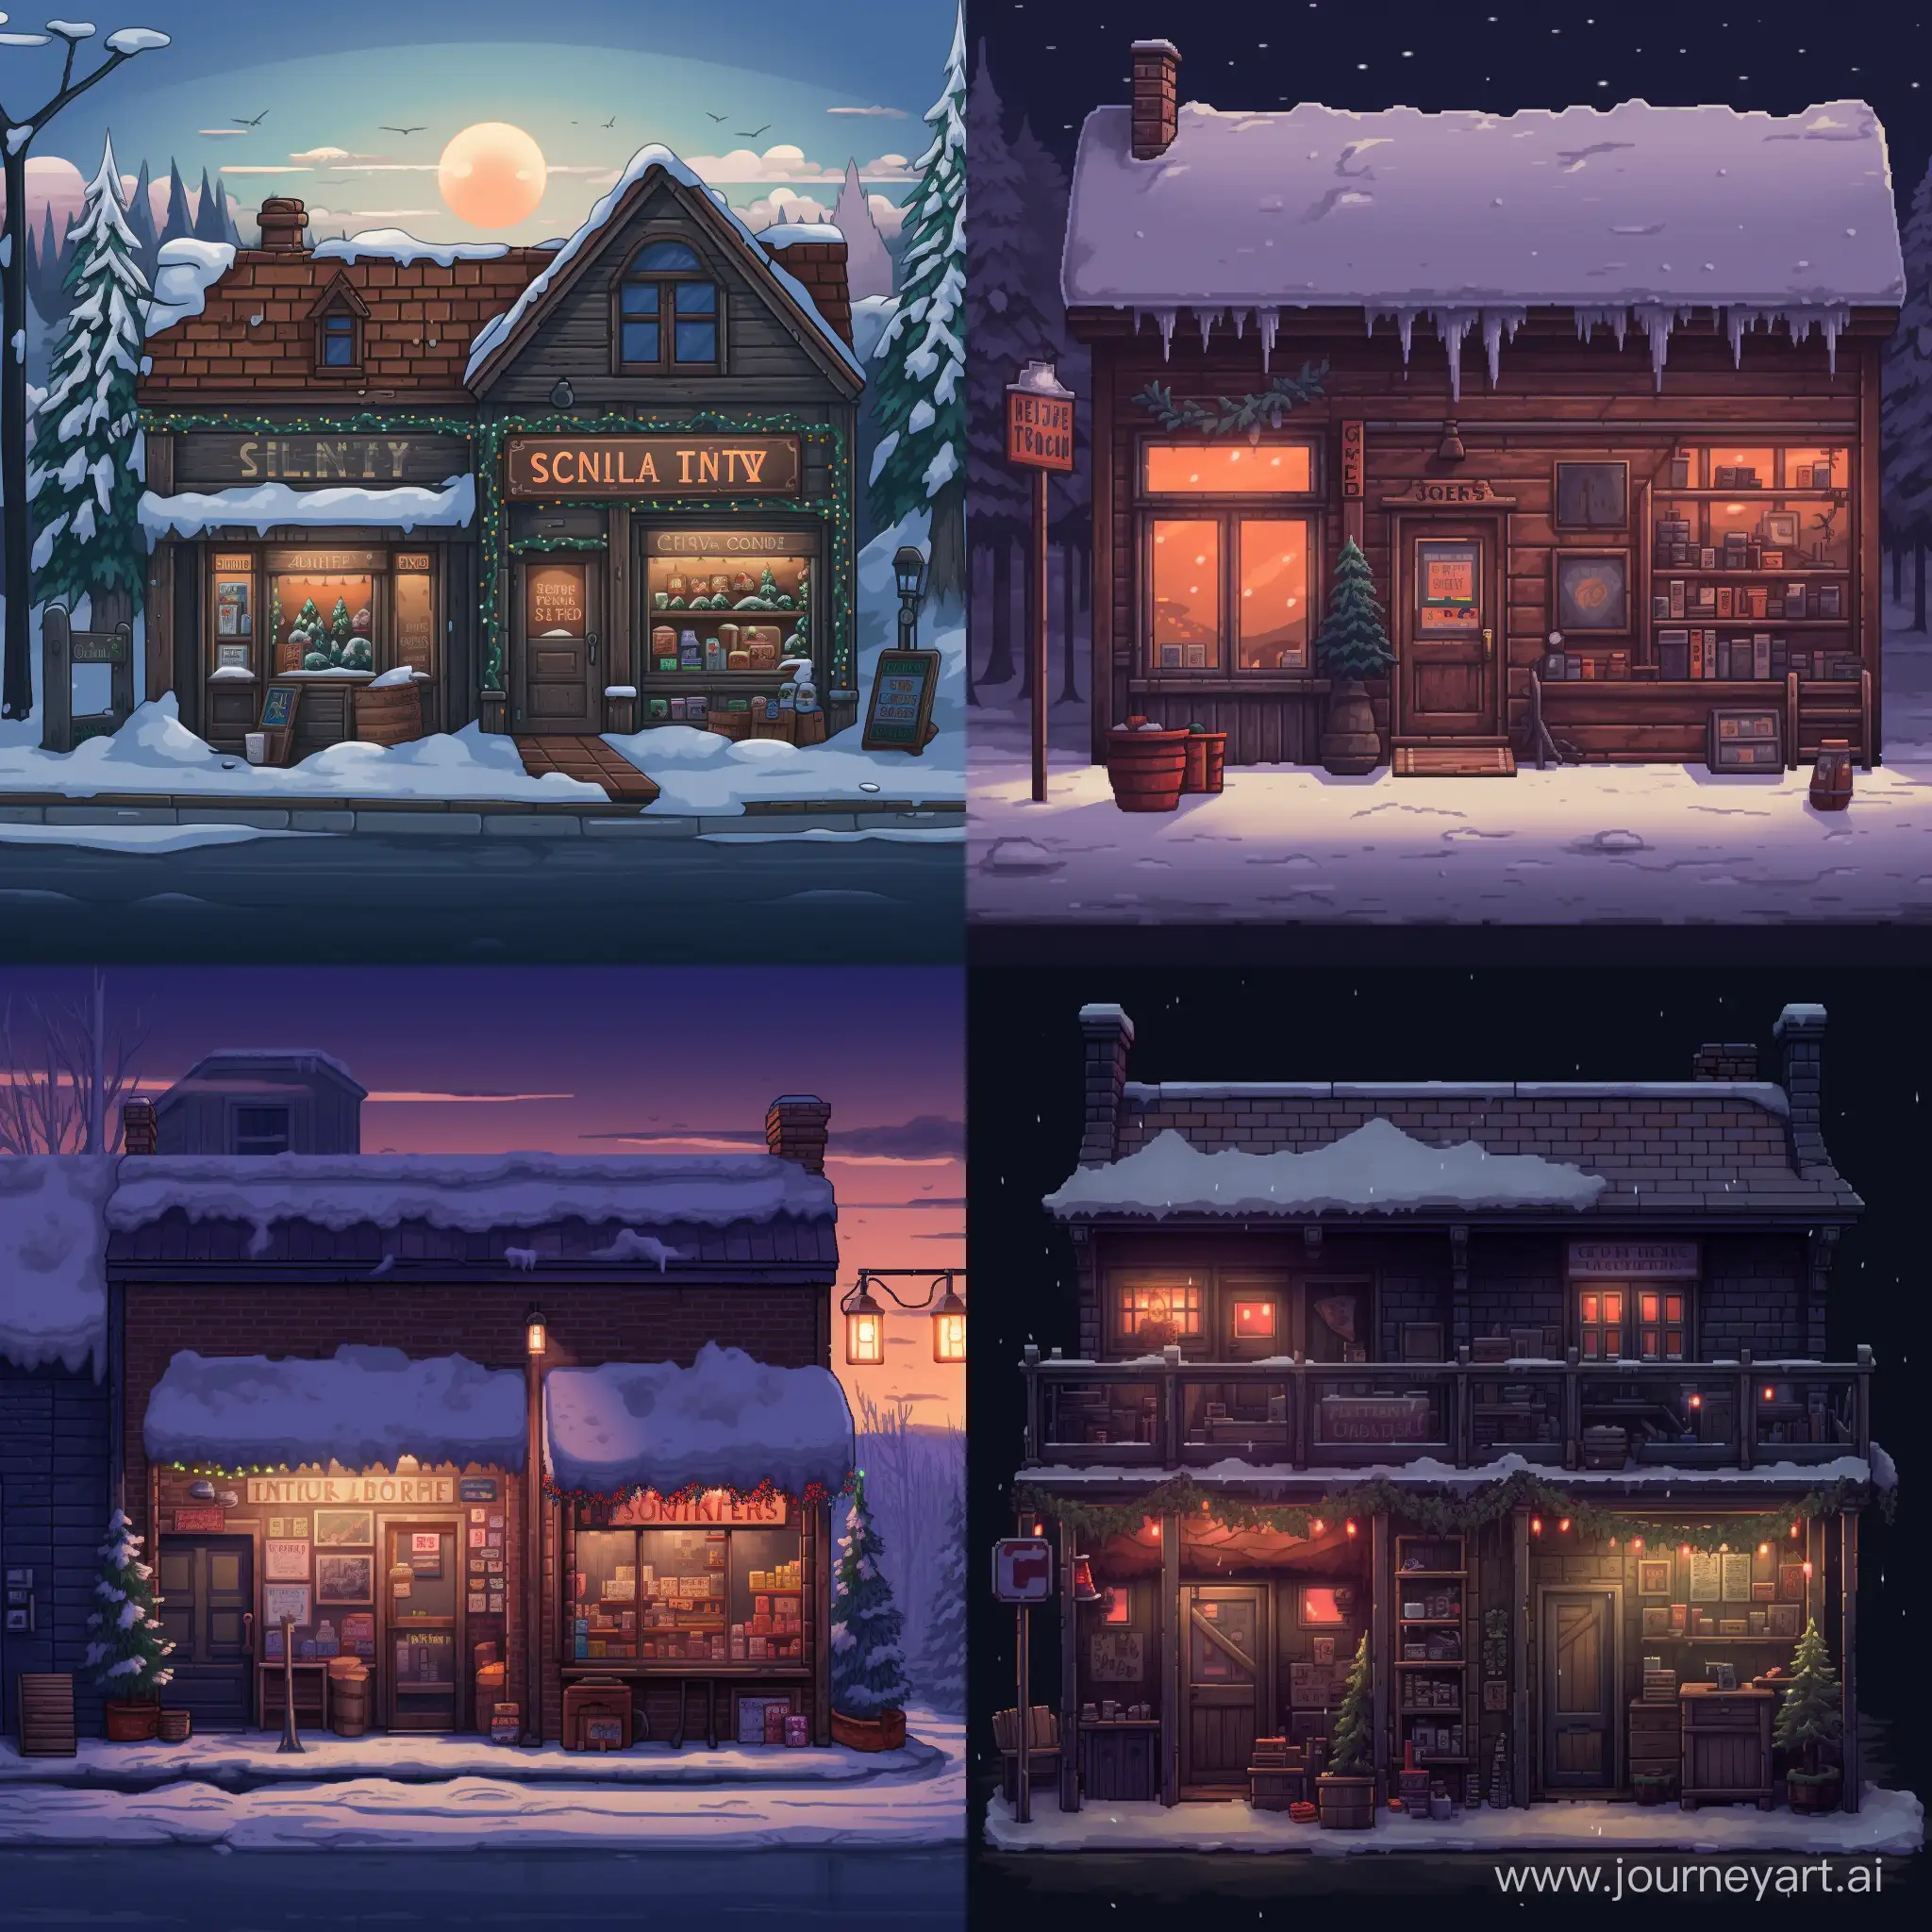 Generate a lonely store in the winter in a very small town, It should be in 8-bit style, but at the same time have dark colors and the store have a very warm entry